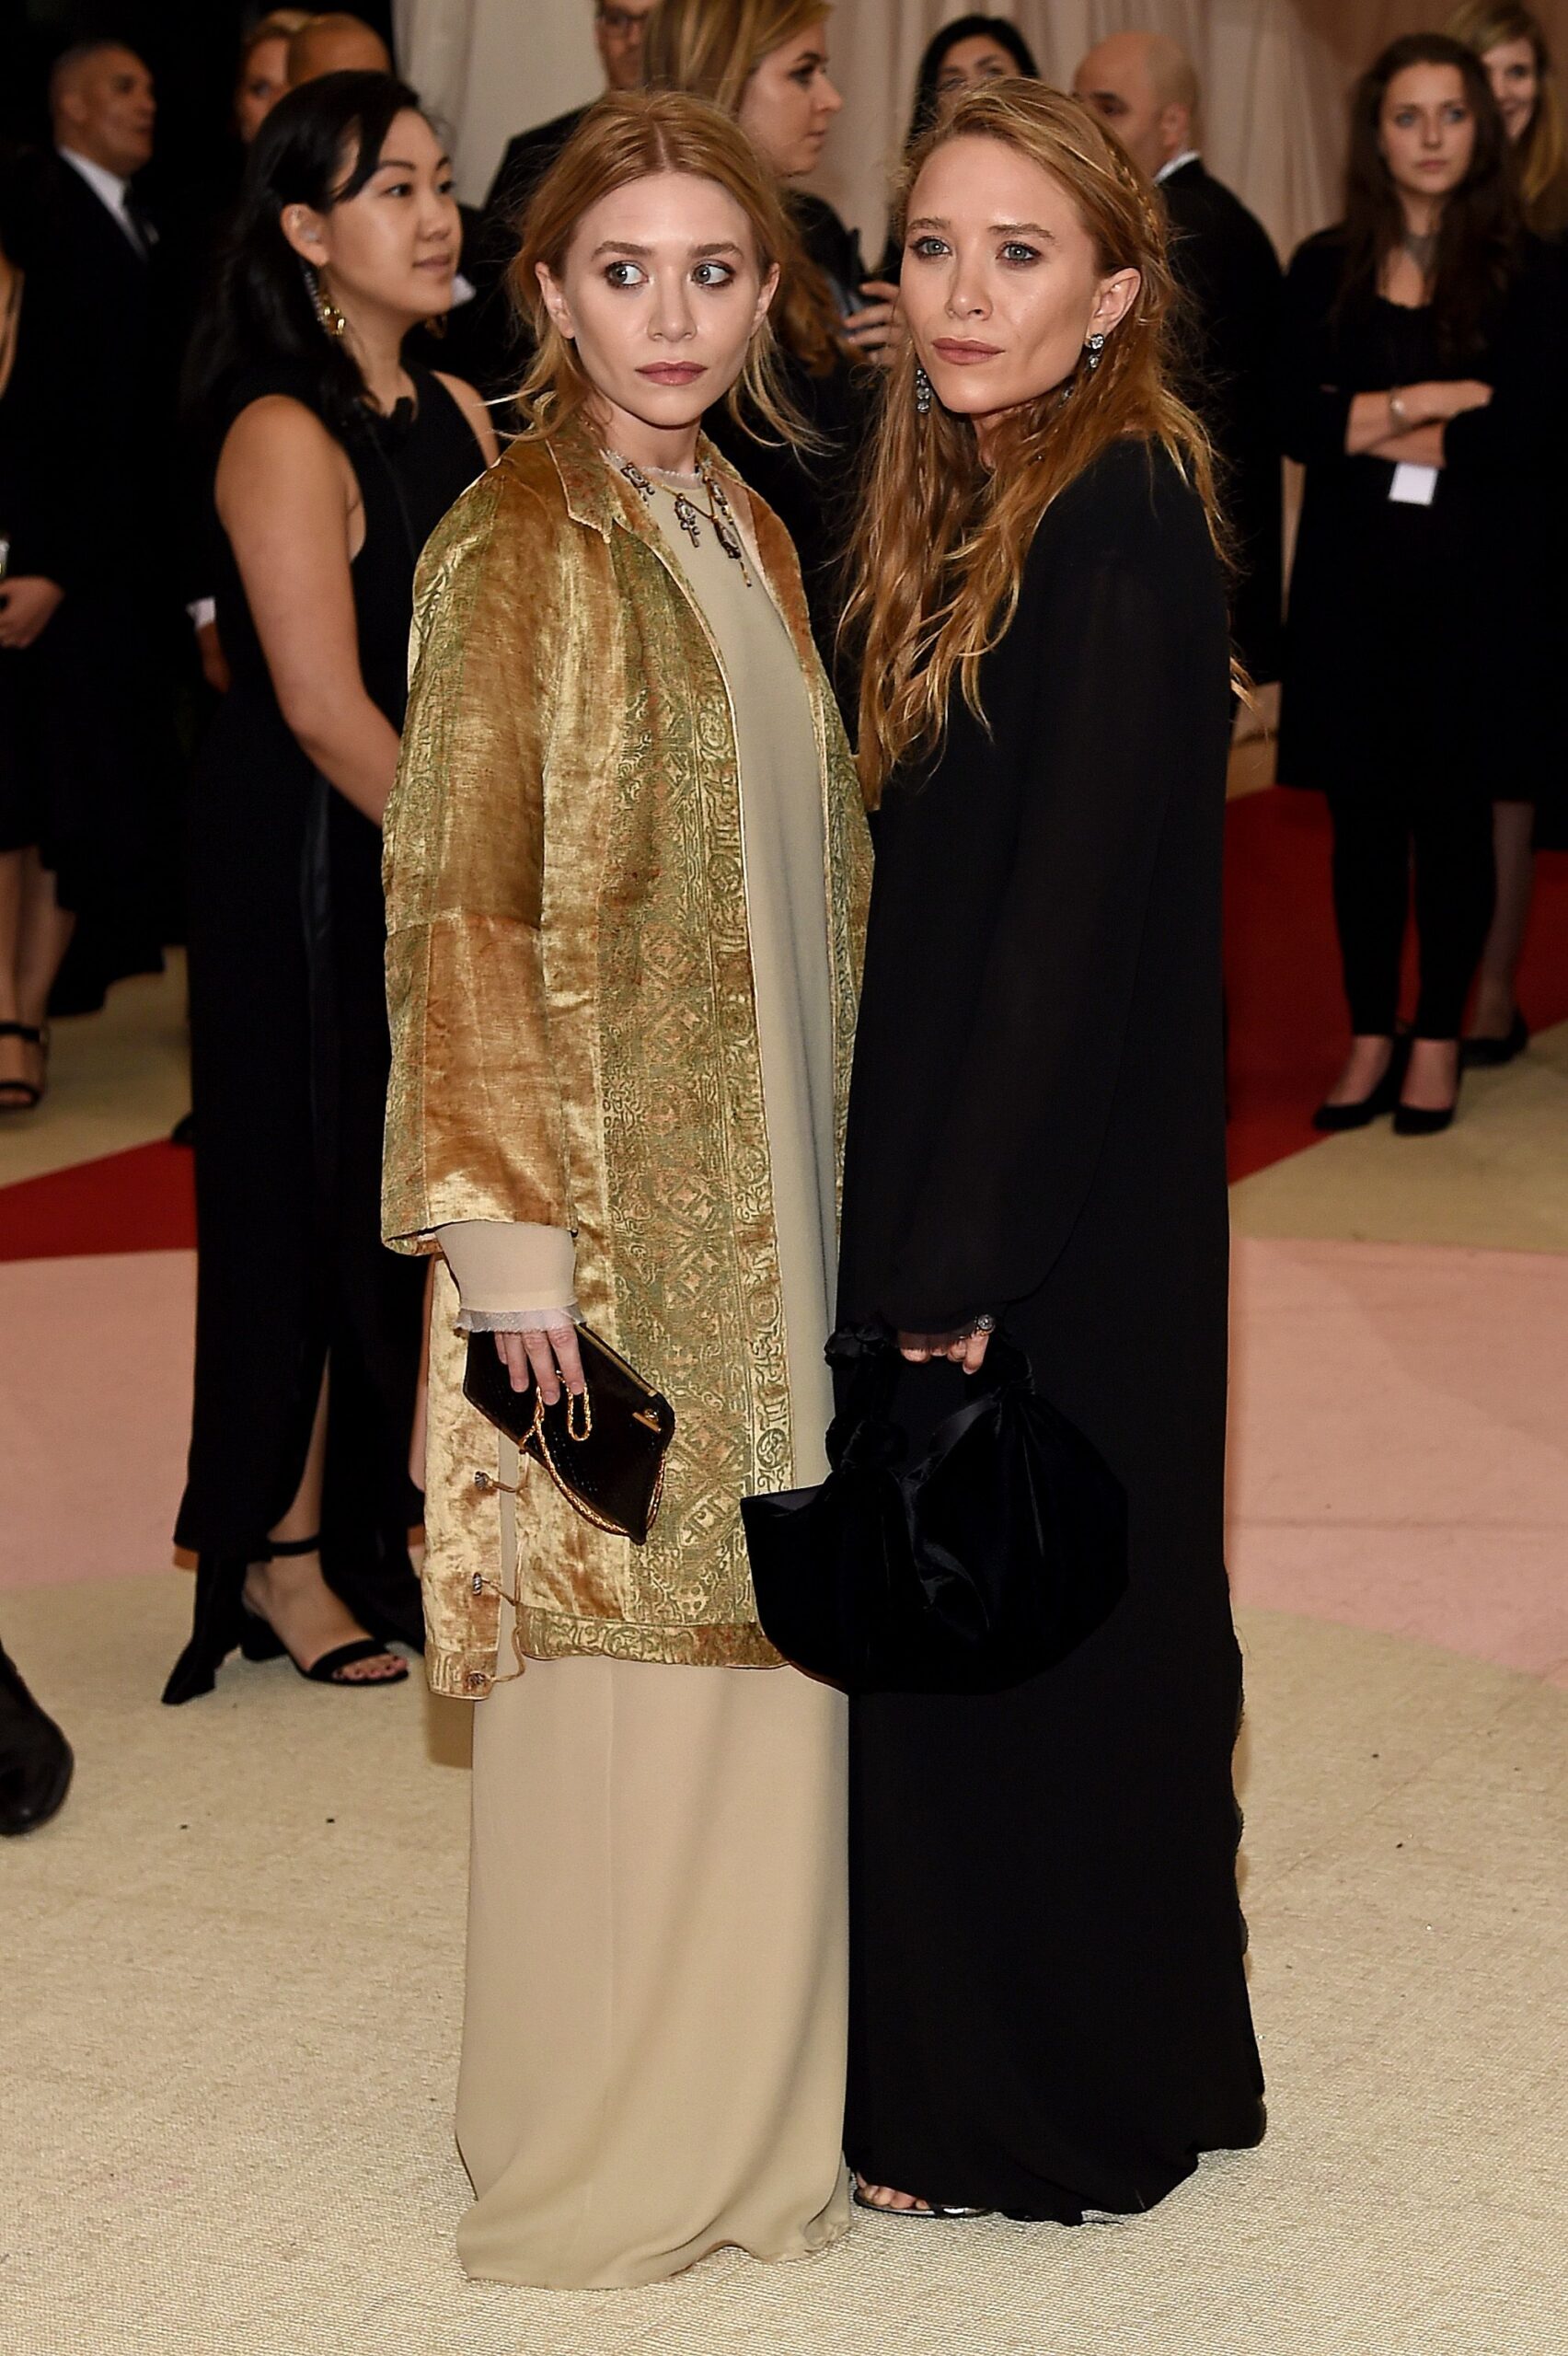 Mary-Kate Olsen and Ashley Olsen at the Metropolitan Museum of Art on May 2, 2016, in New York City. | Source: Getty Images